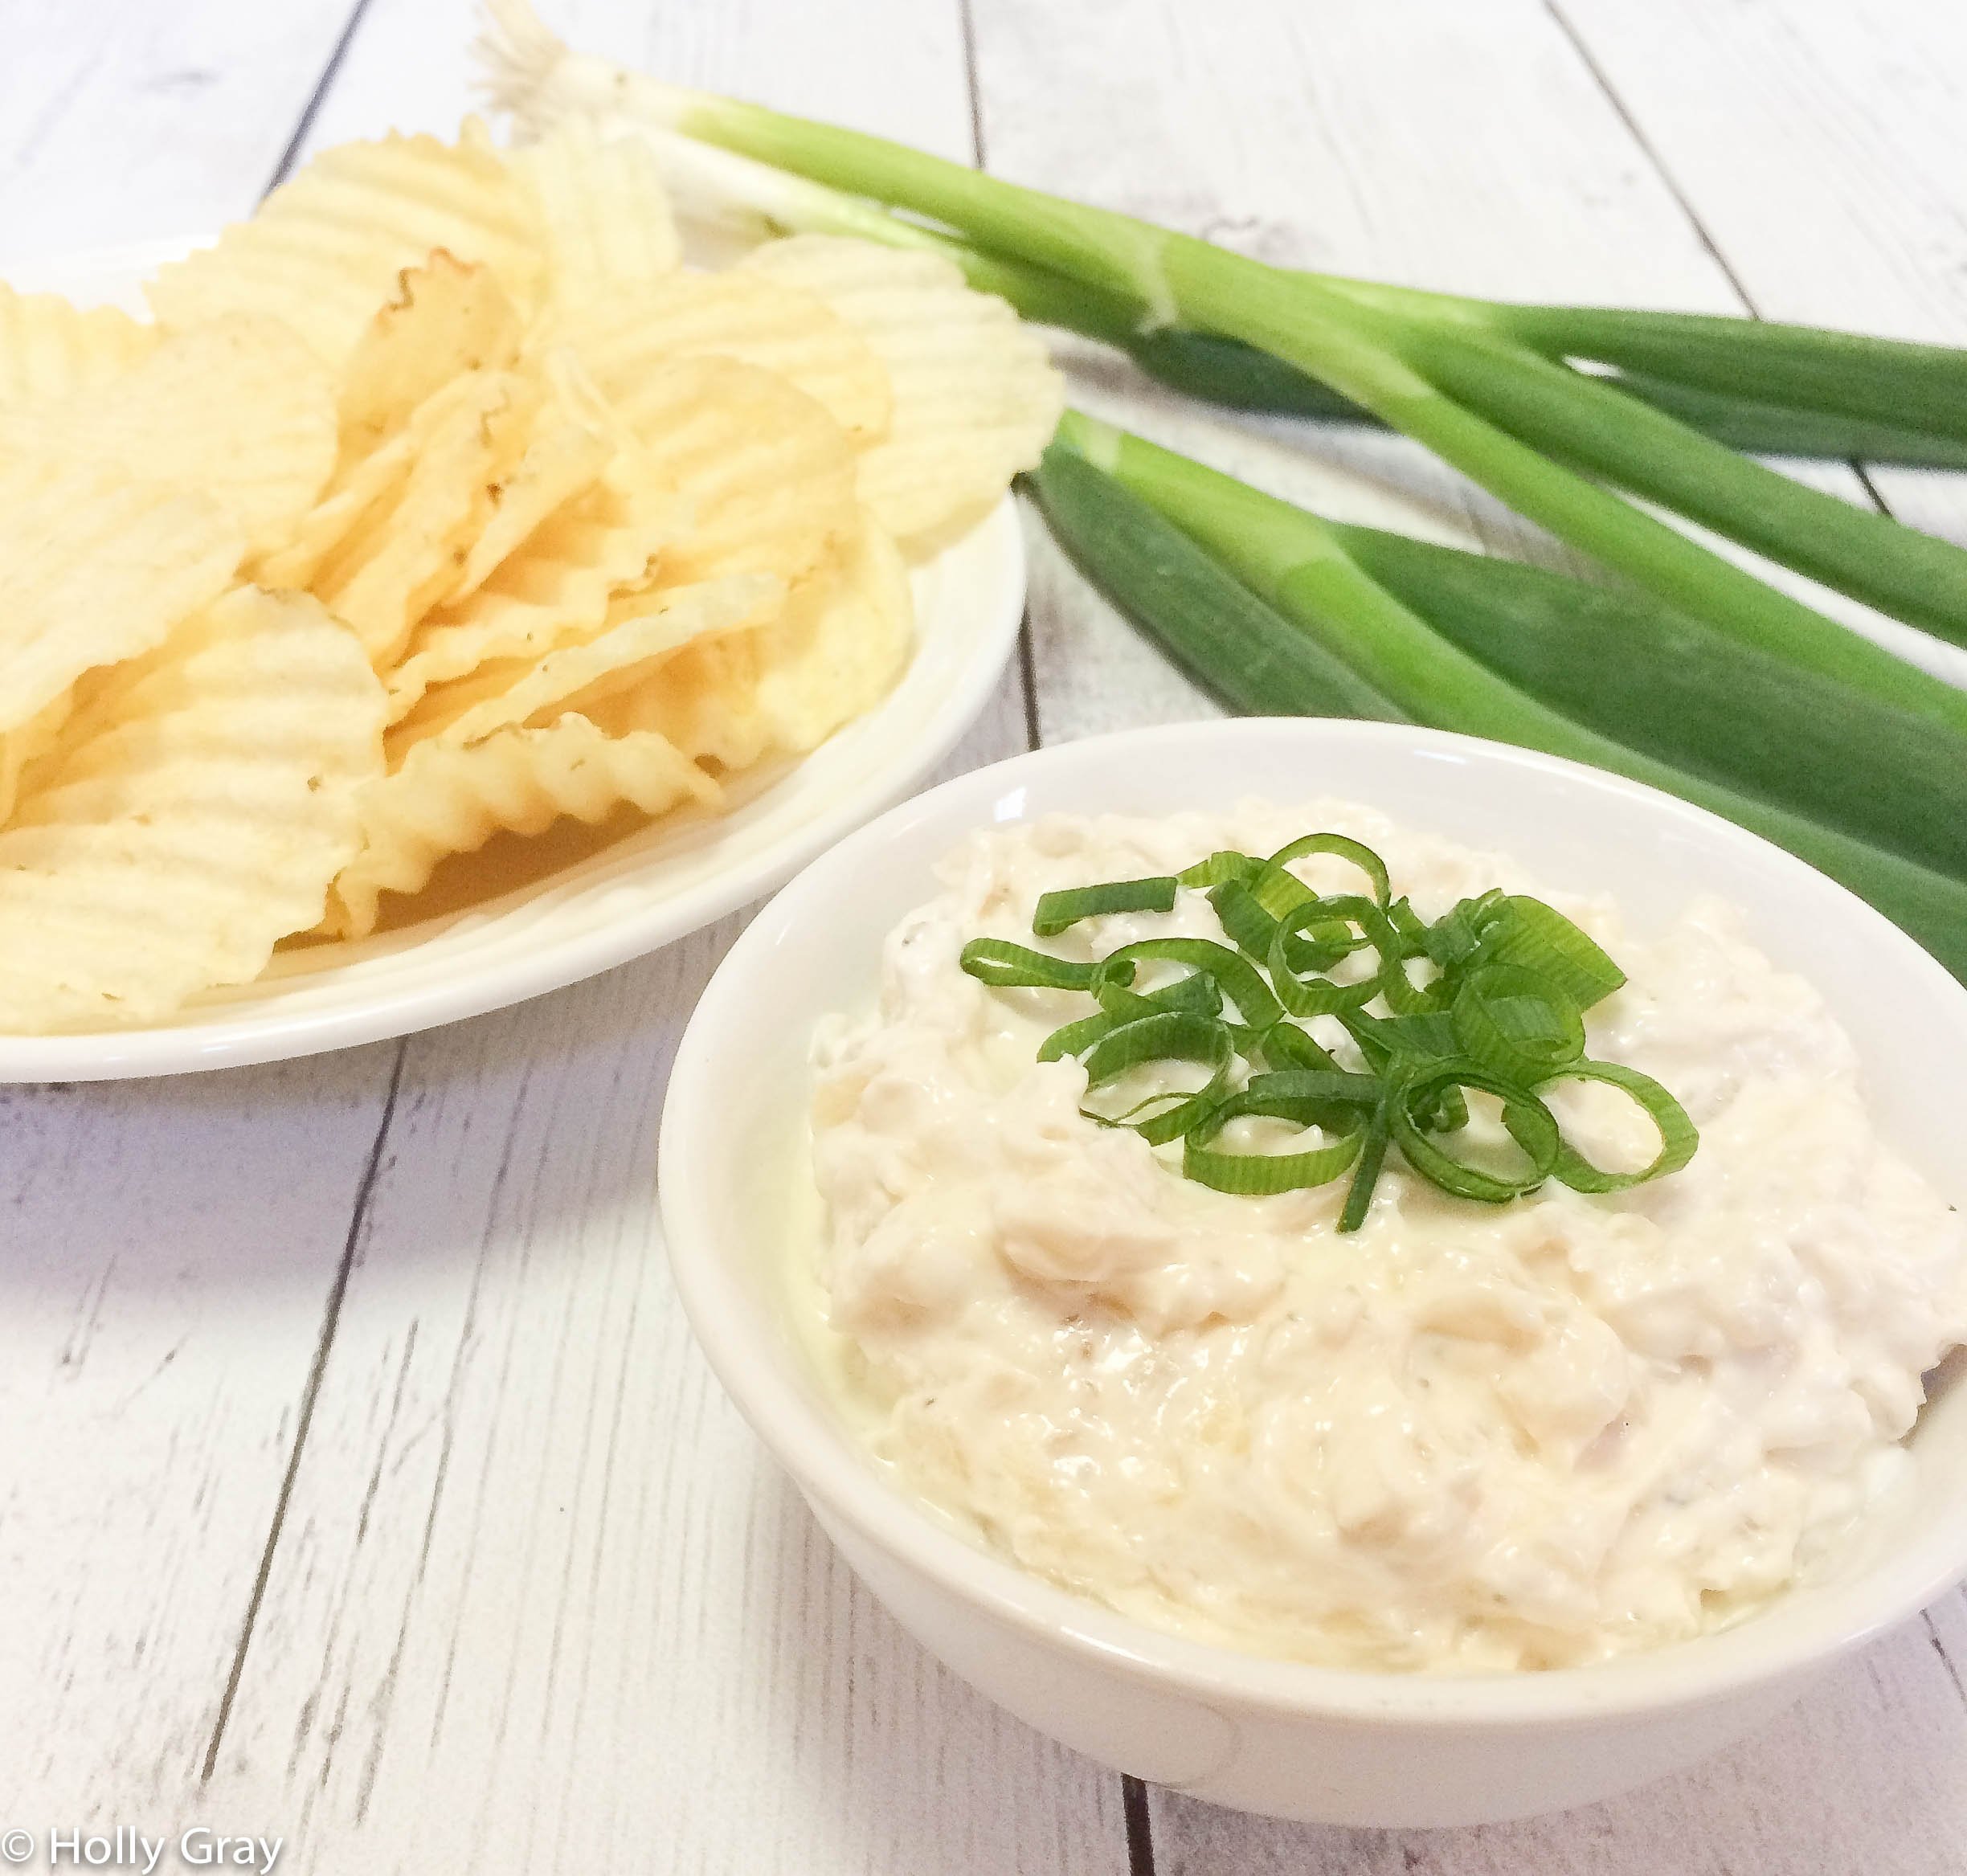 Vegan Caramelized Onion Dip - Perfect for Game Day snacking - This recipe will make you want to ditch the pre-made onion dips for good! via @thiswifecooks